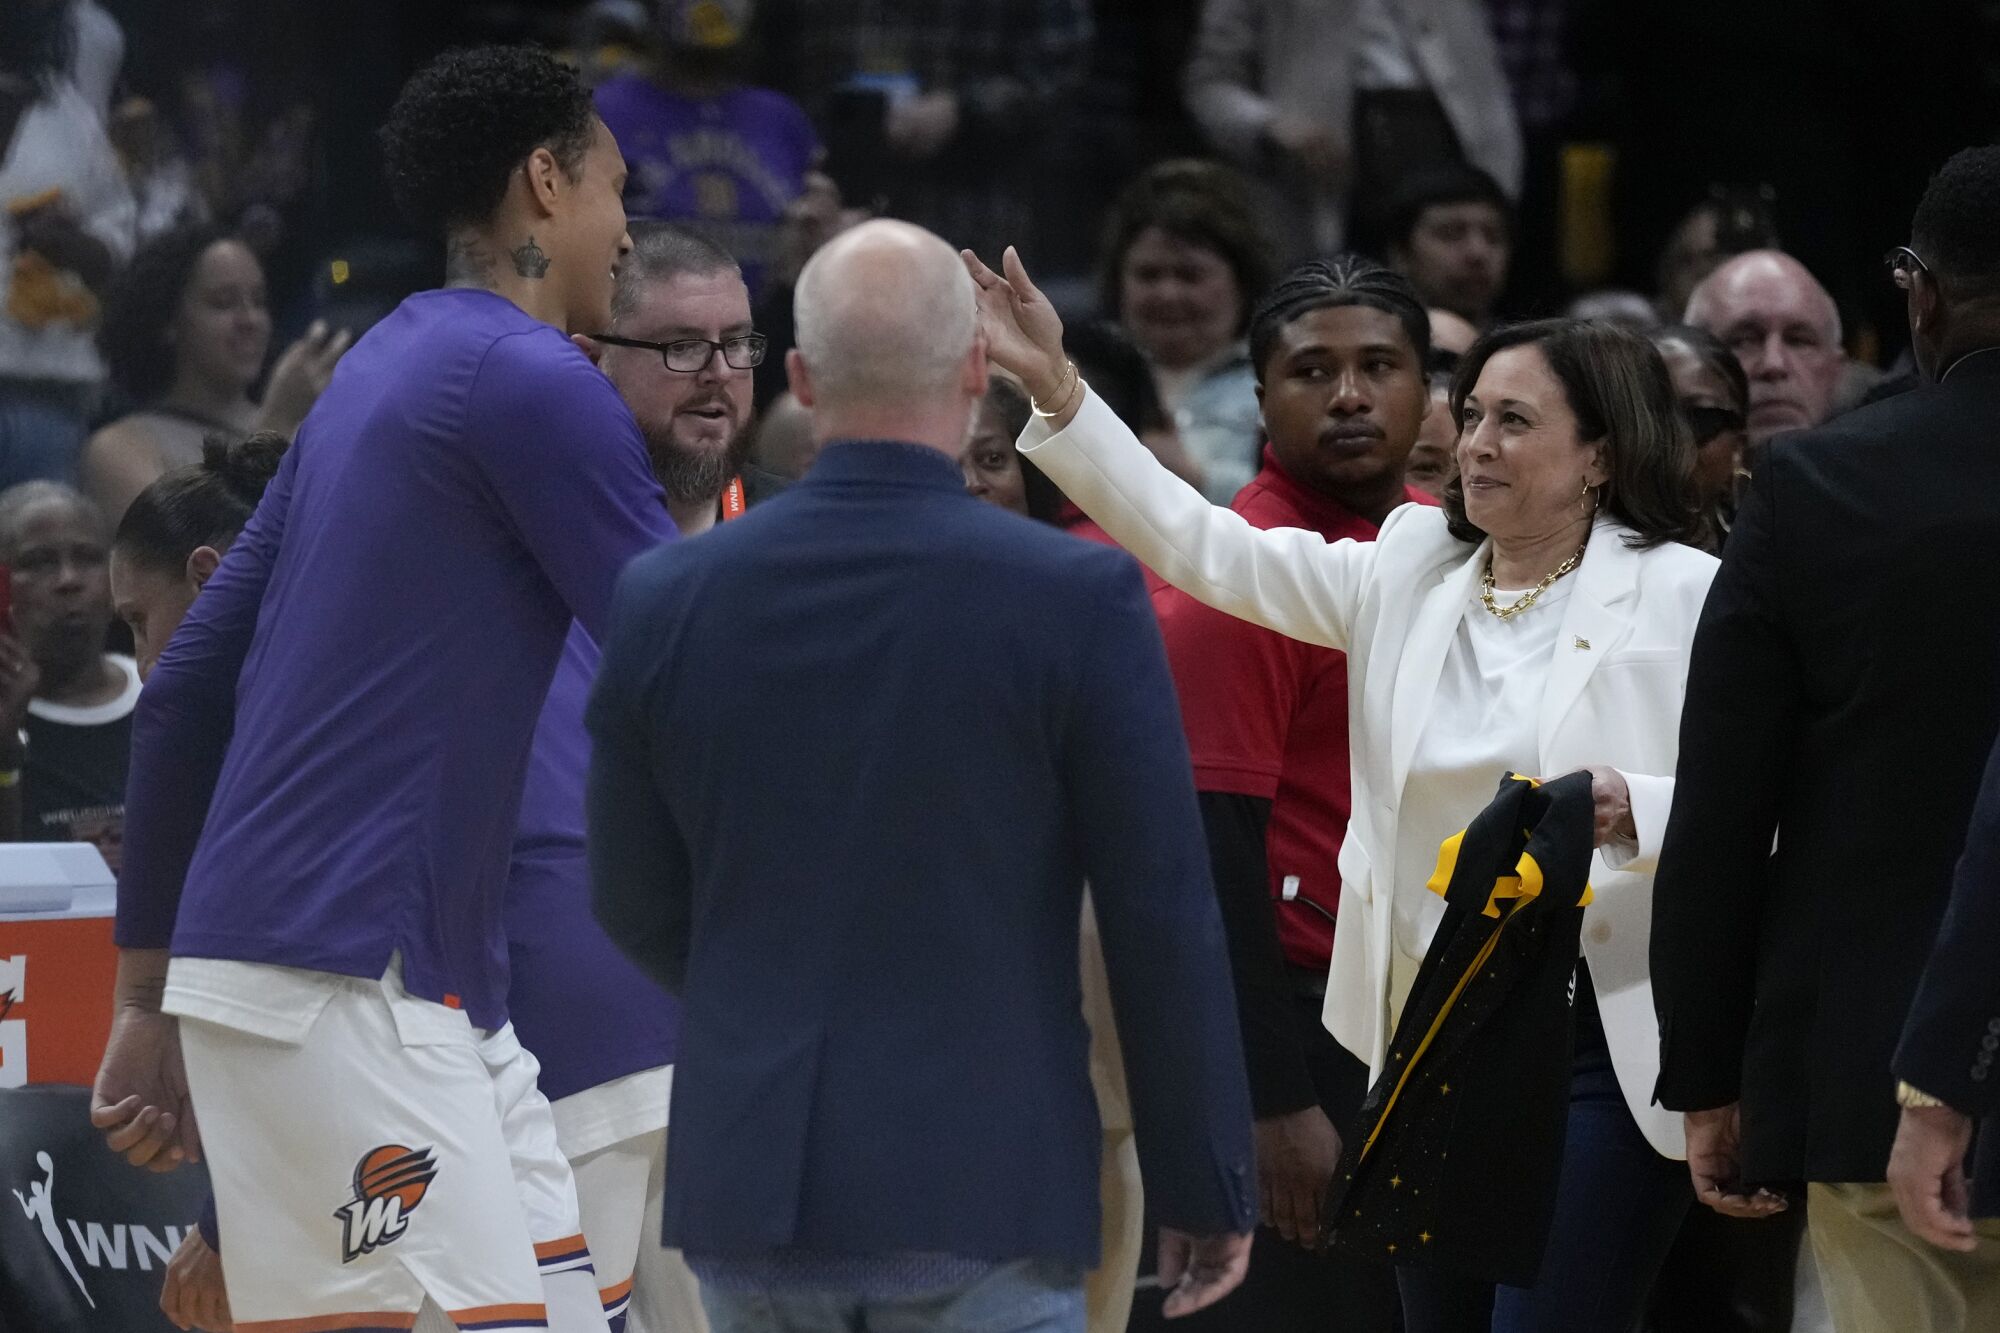 Phoenix Mercury center Brittney Griner is greeted by Vice President Kamala Harris and leans forward for a hug